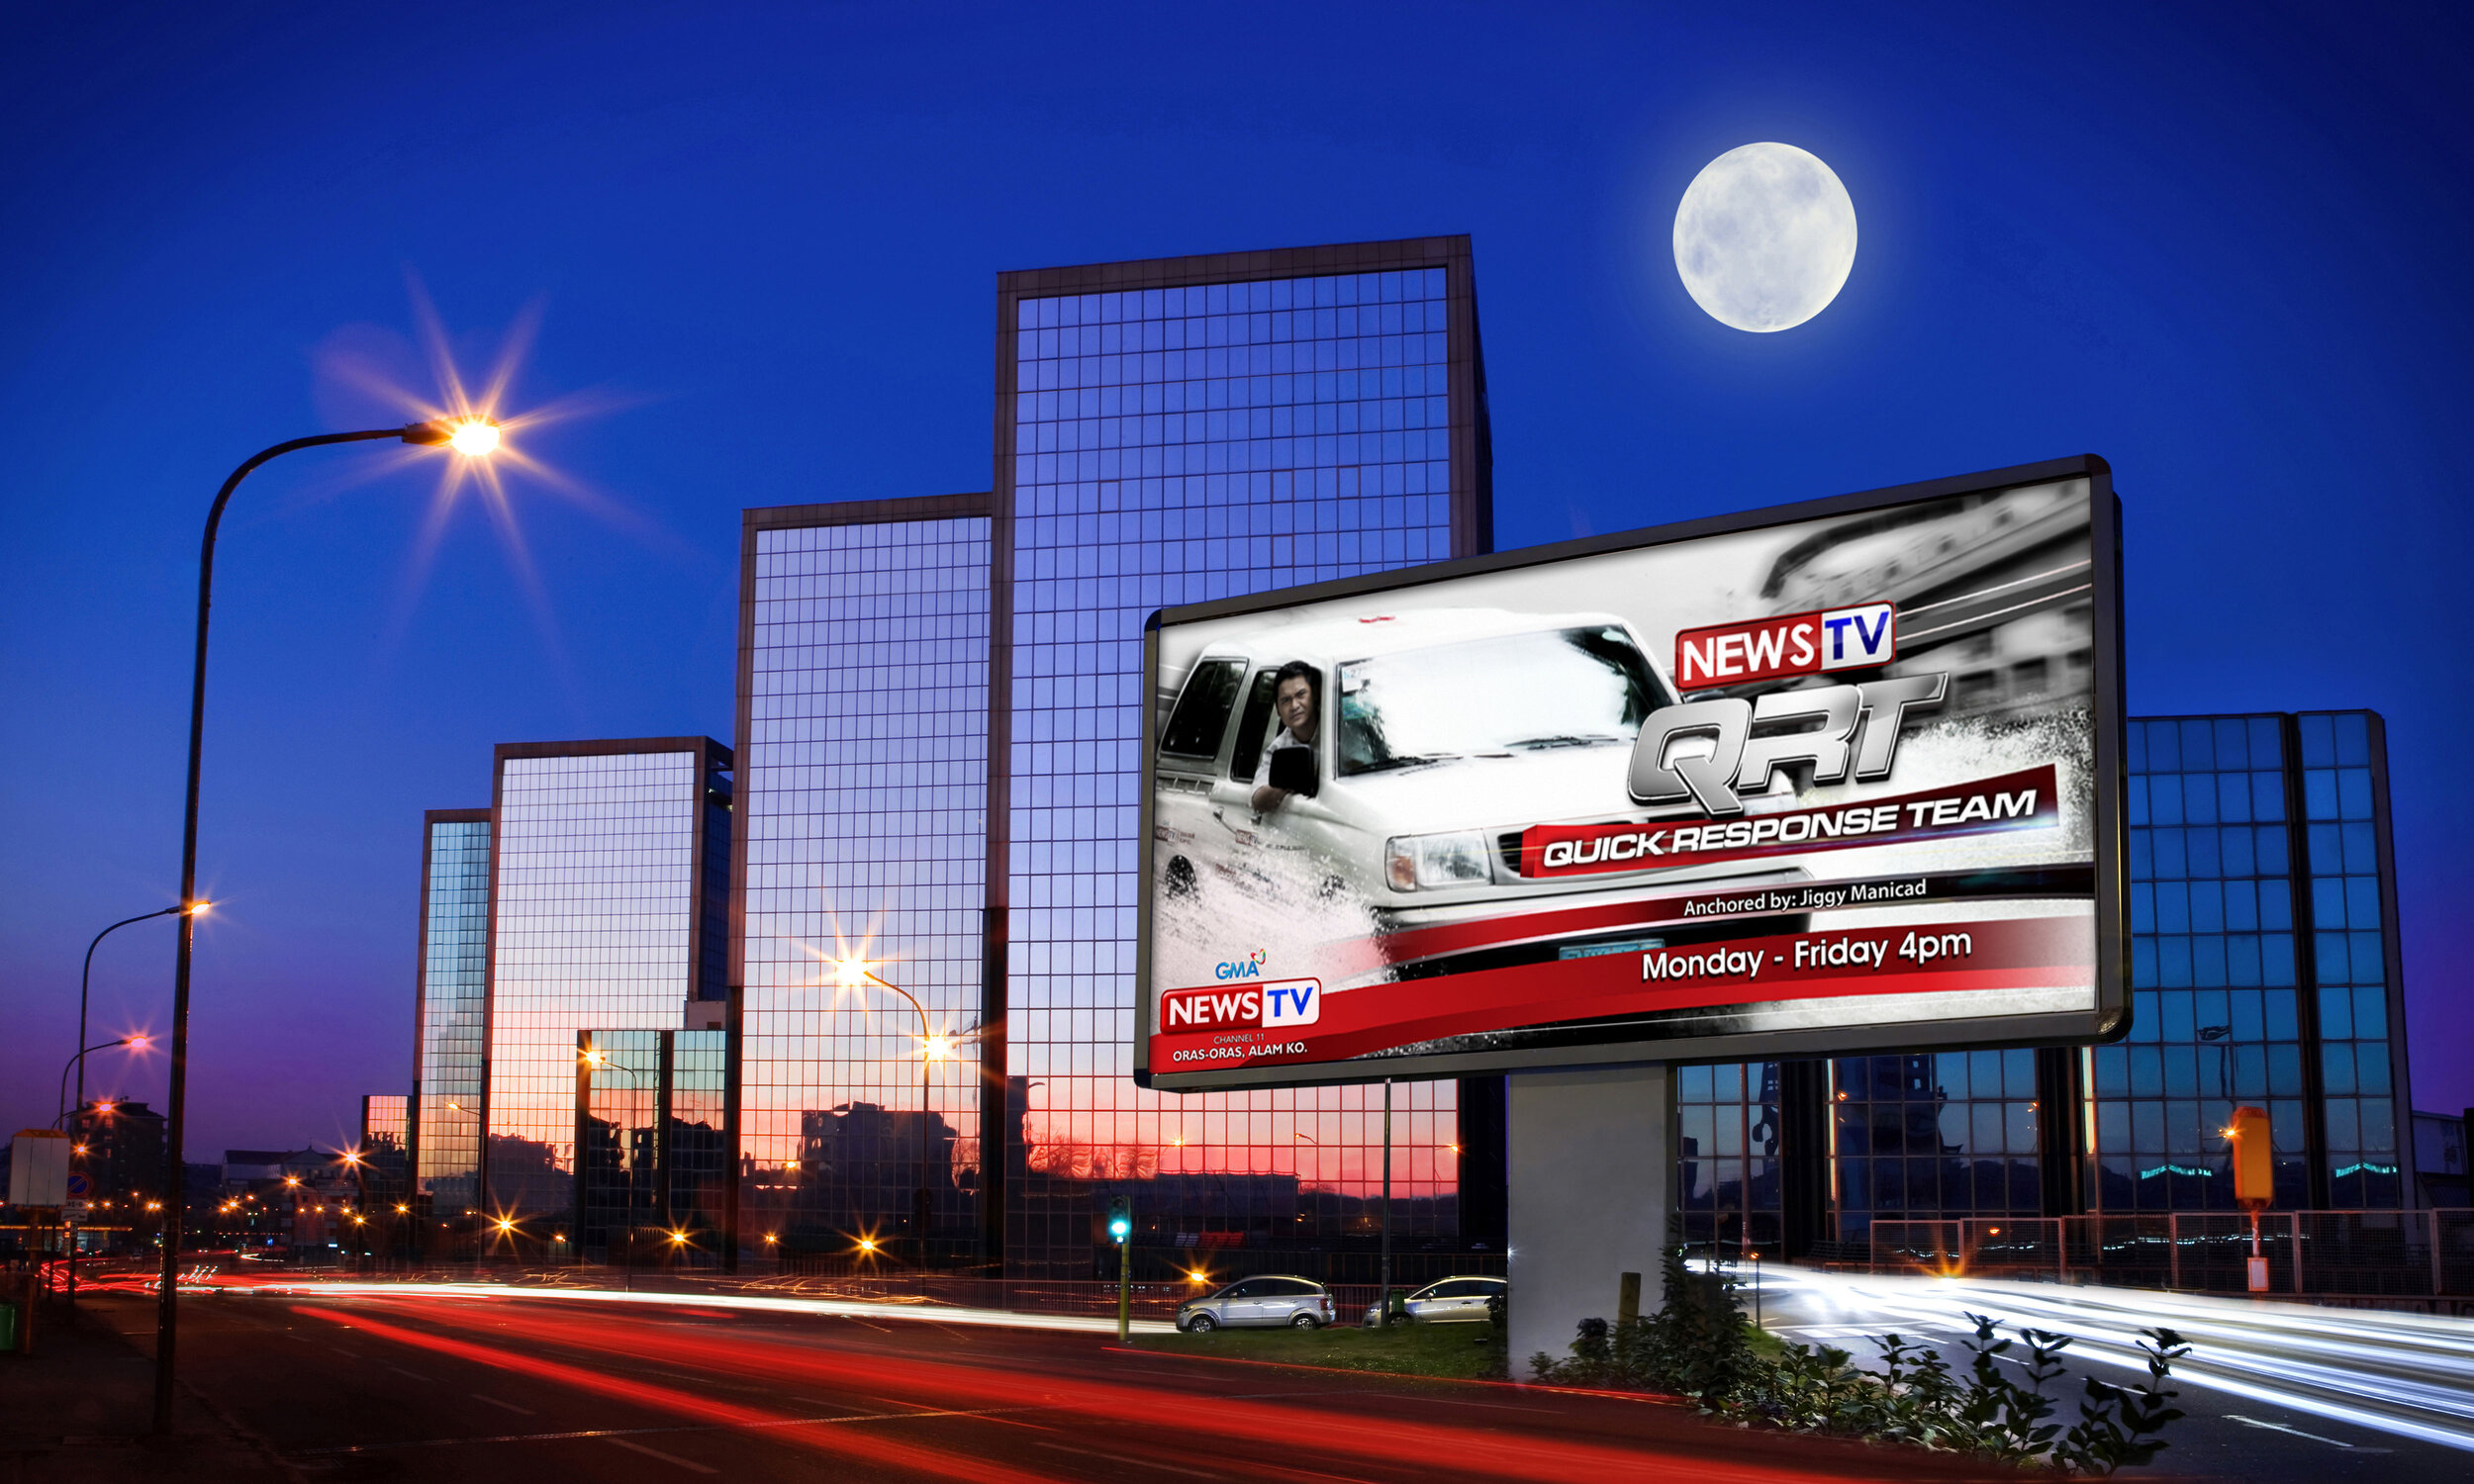 Large Format Print Designs - Billboards and Banners